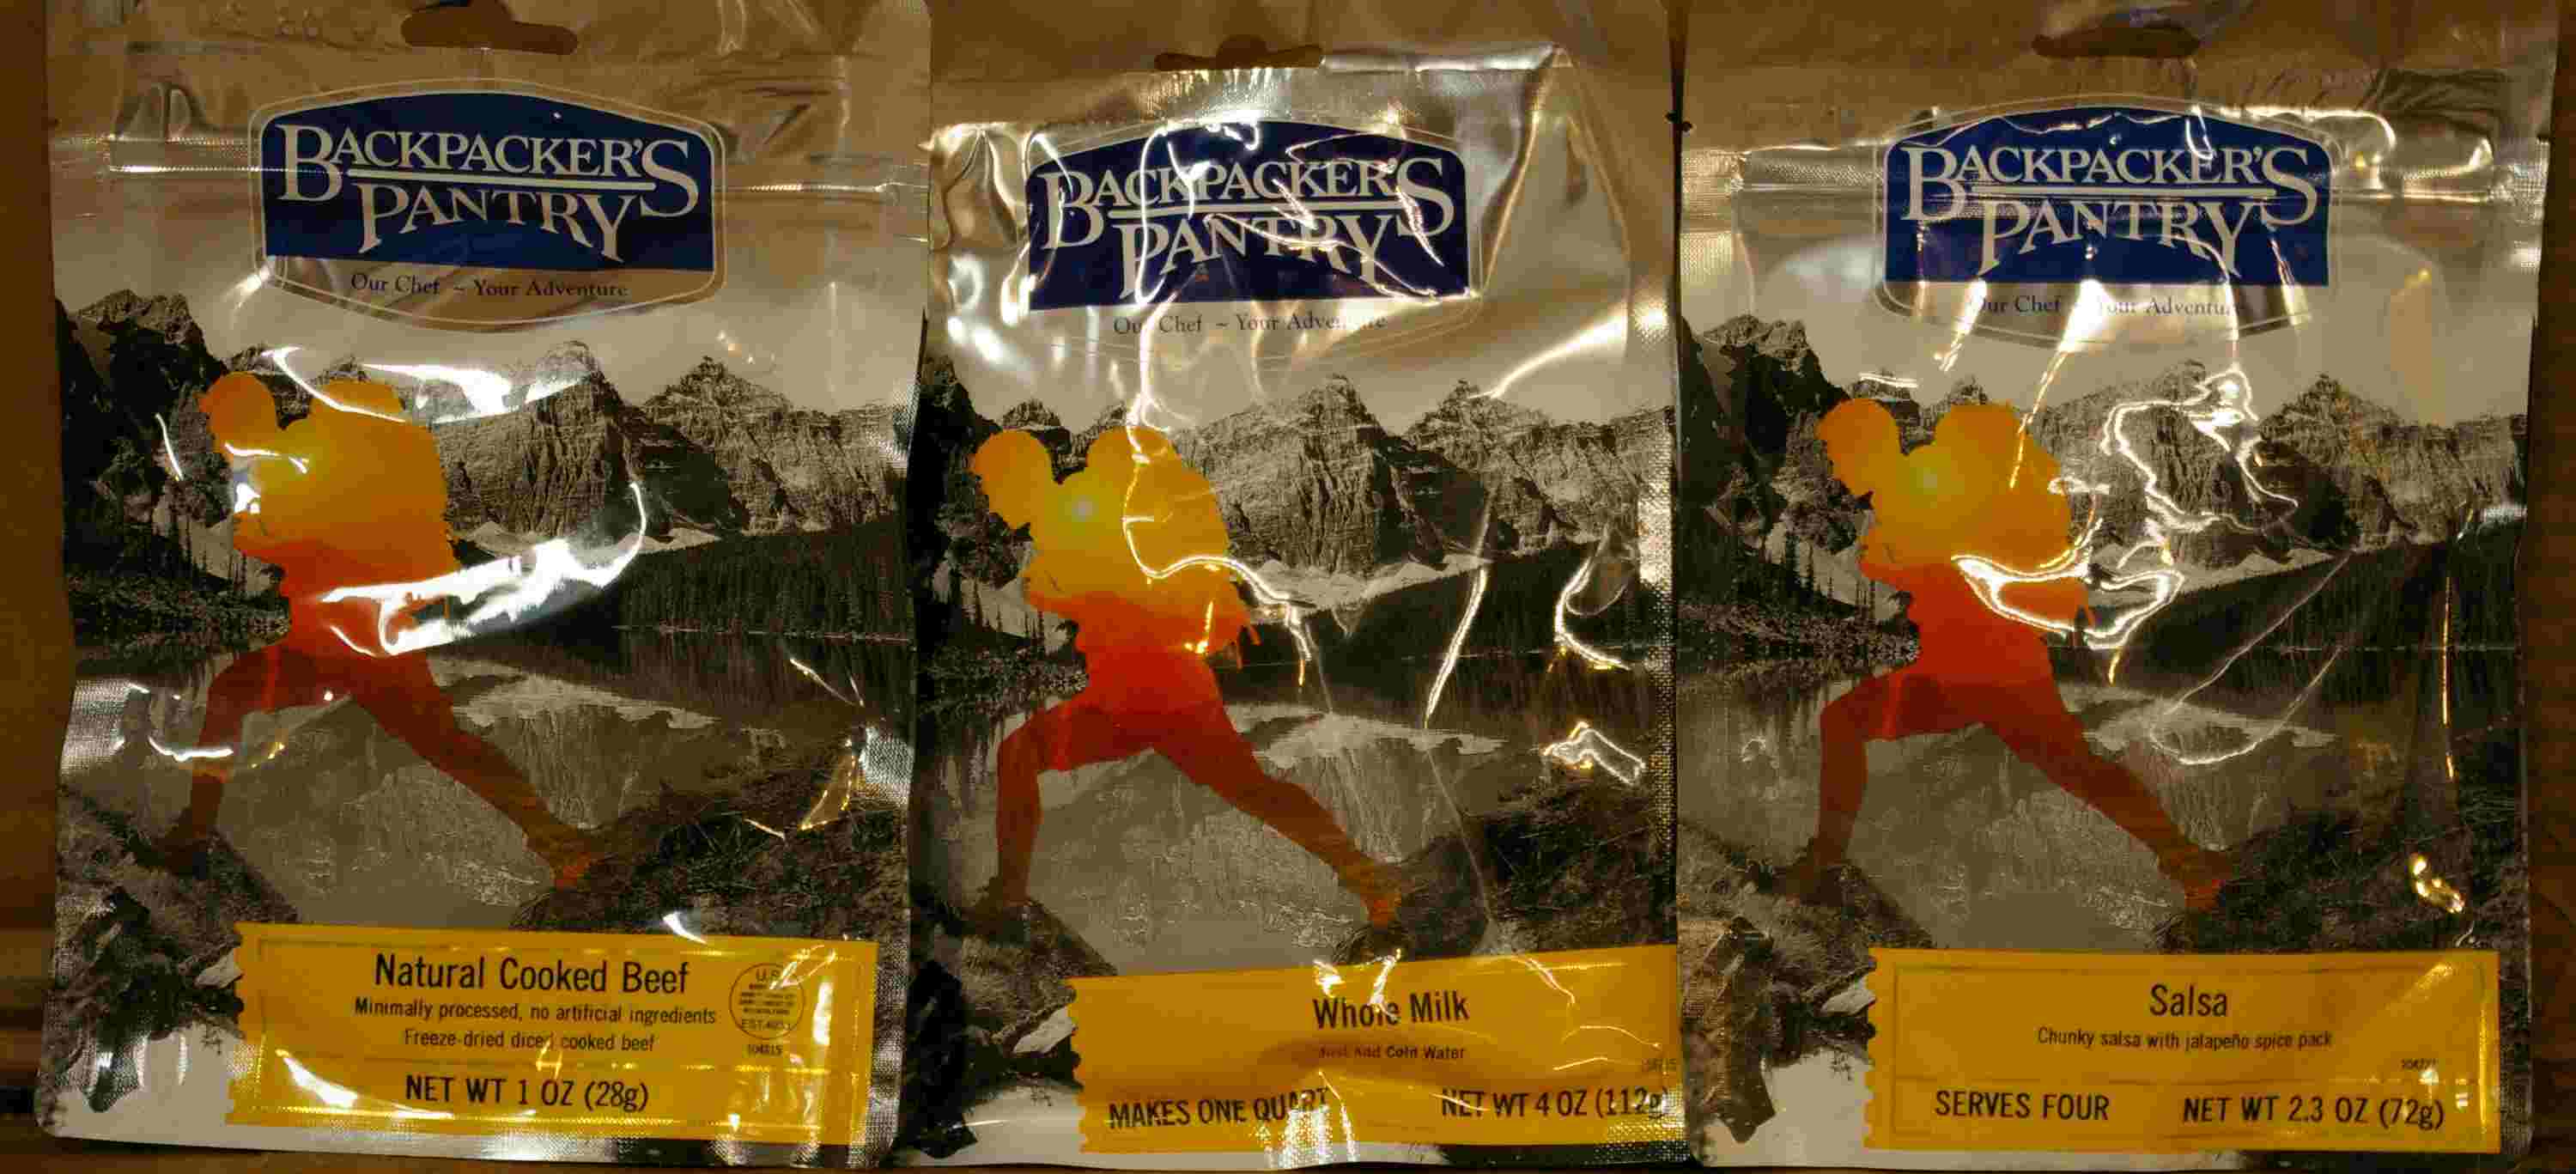 Backpacker S Pantry Freeze Dried Food Pouches Ldp Camping Foods